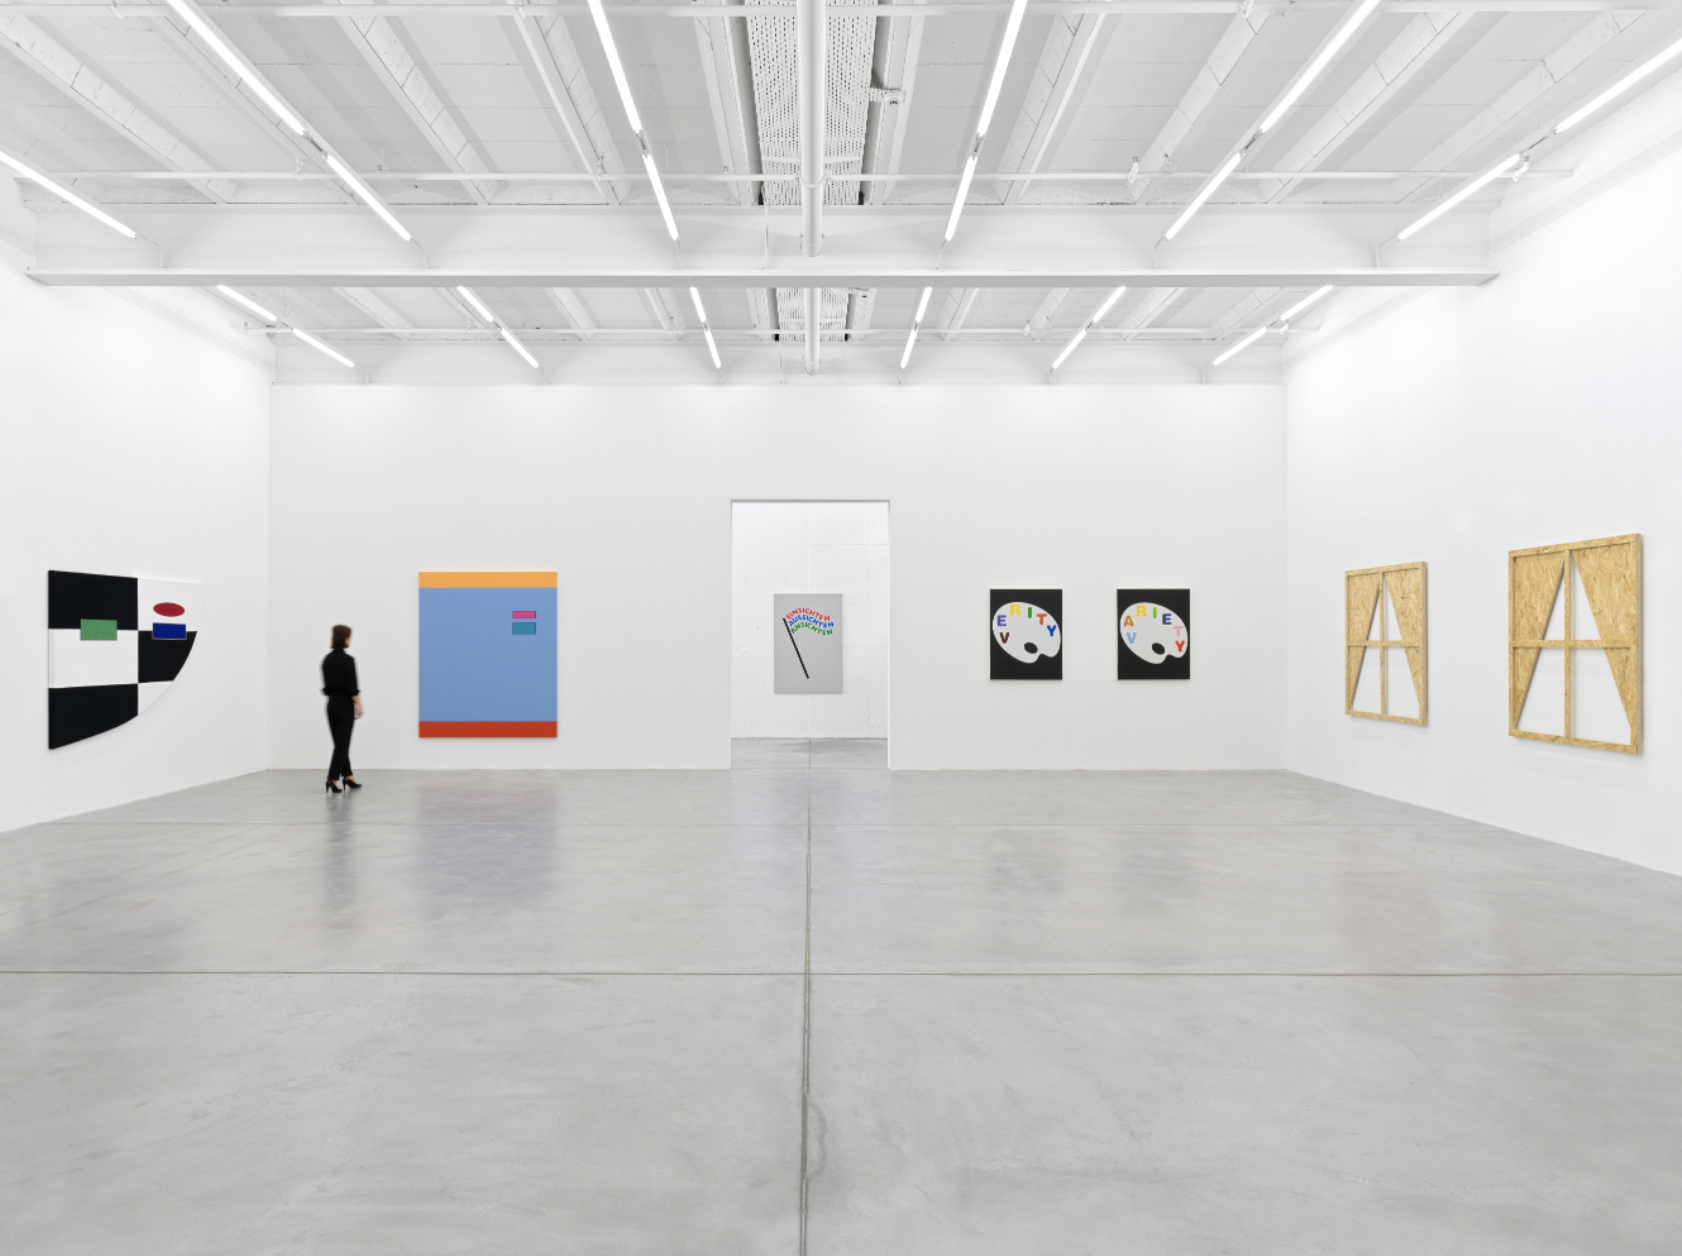 Installation view with works by Annamarie Ho, Jan Kiefer, and Gina Fischli